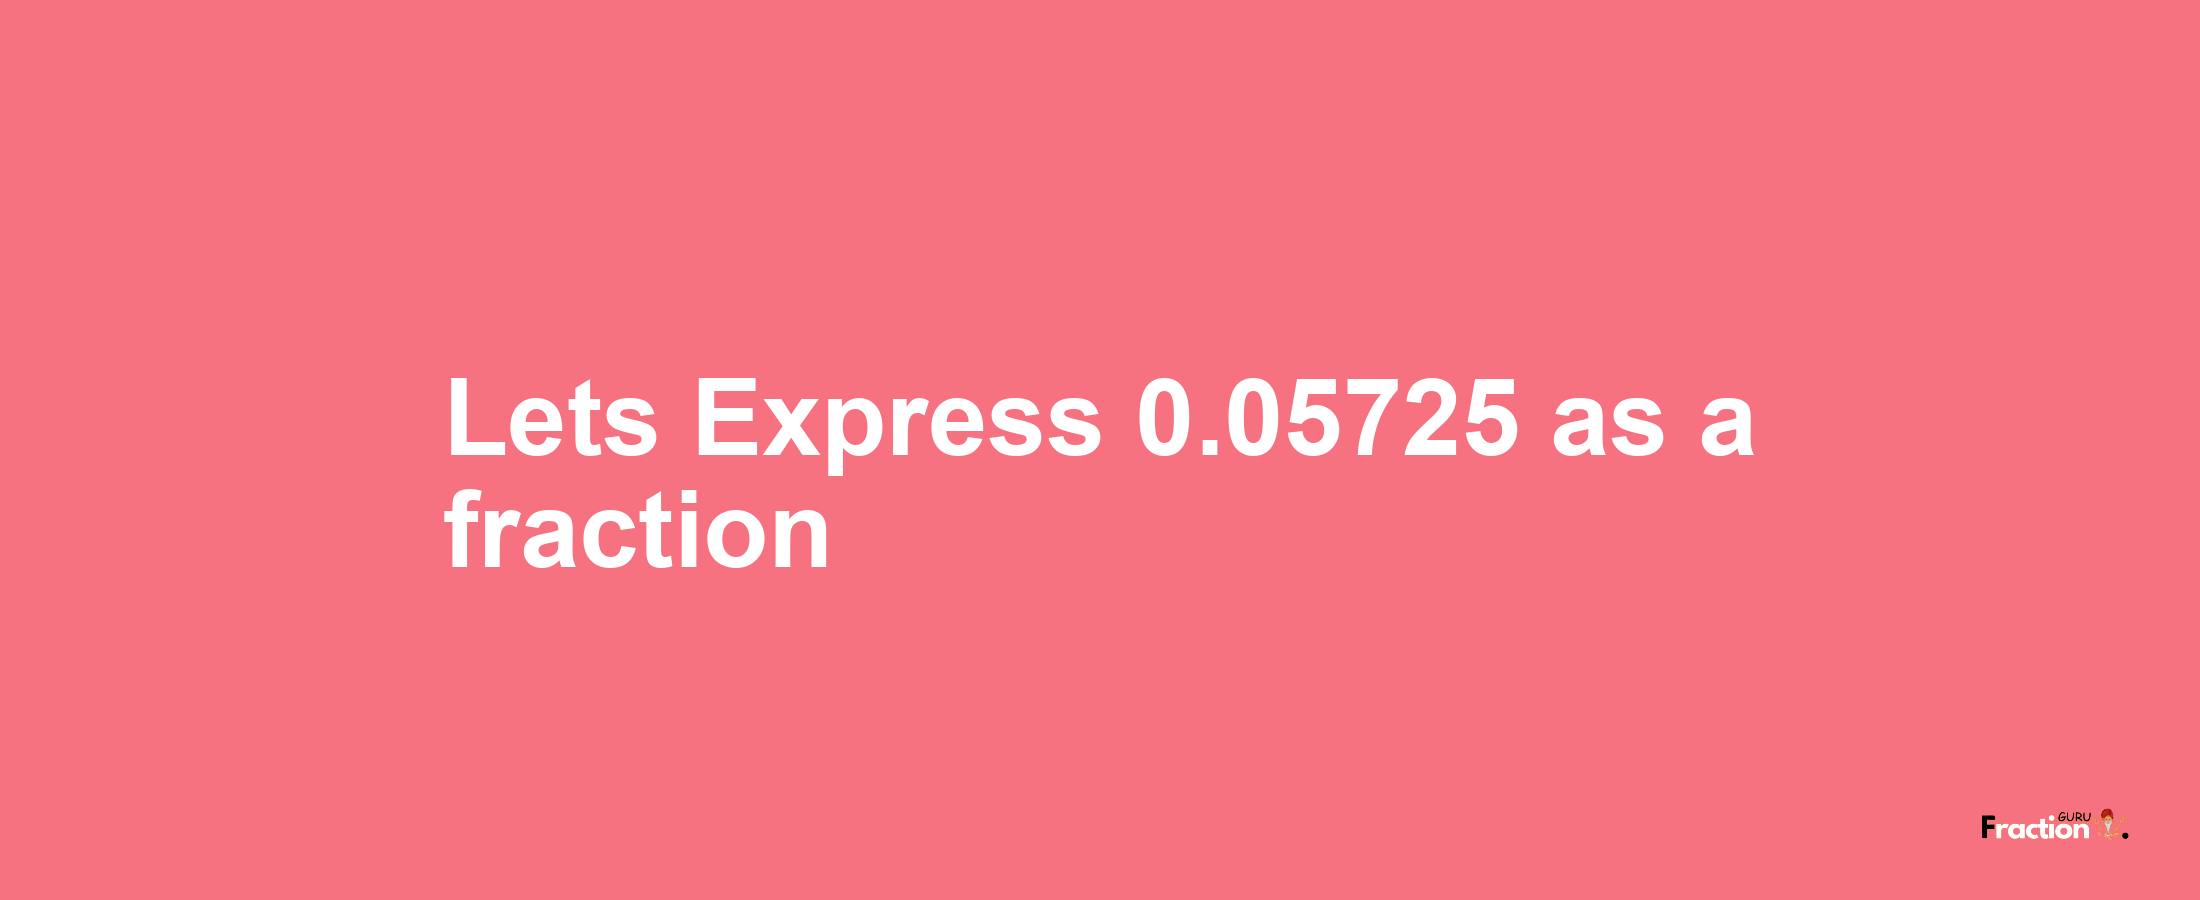 Lets Express 0.05725 as afraction